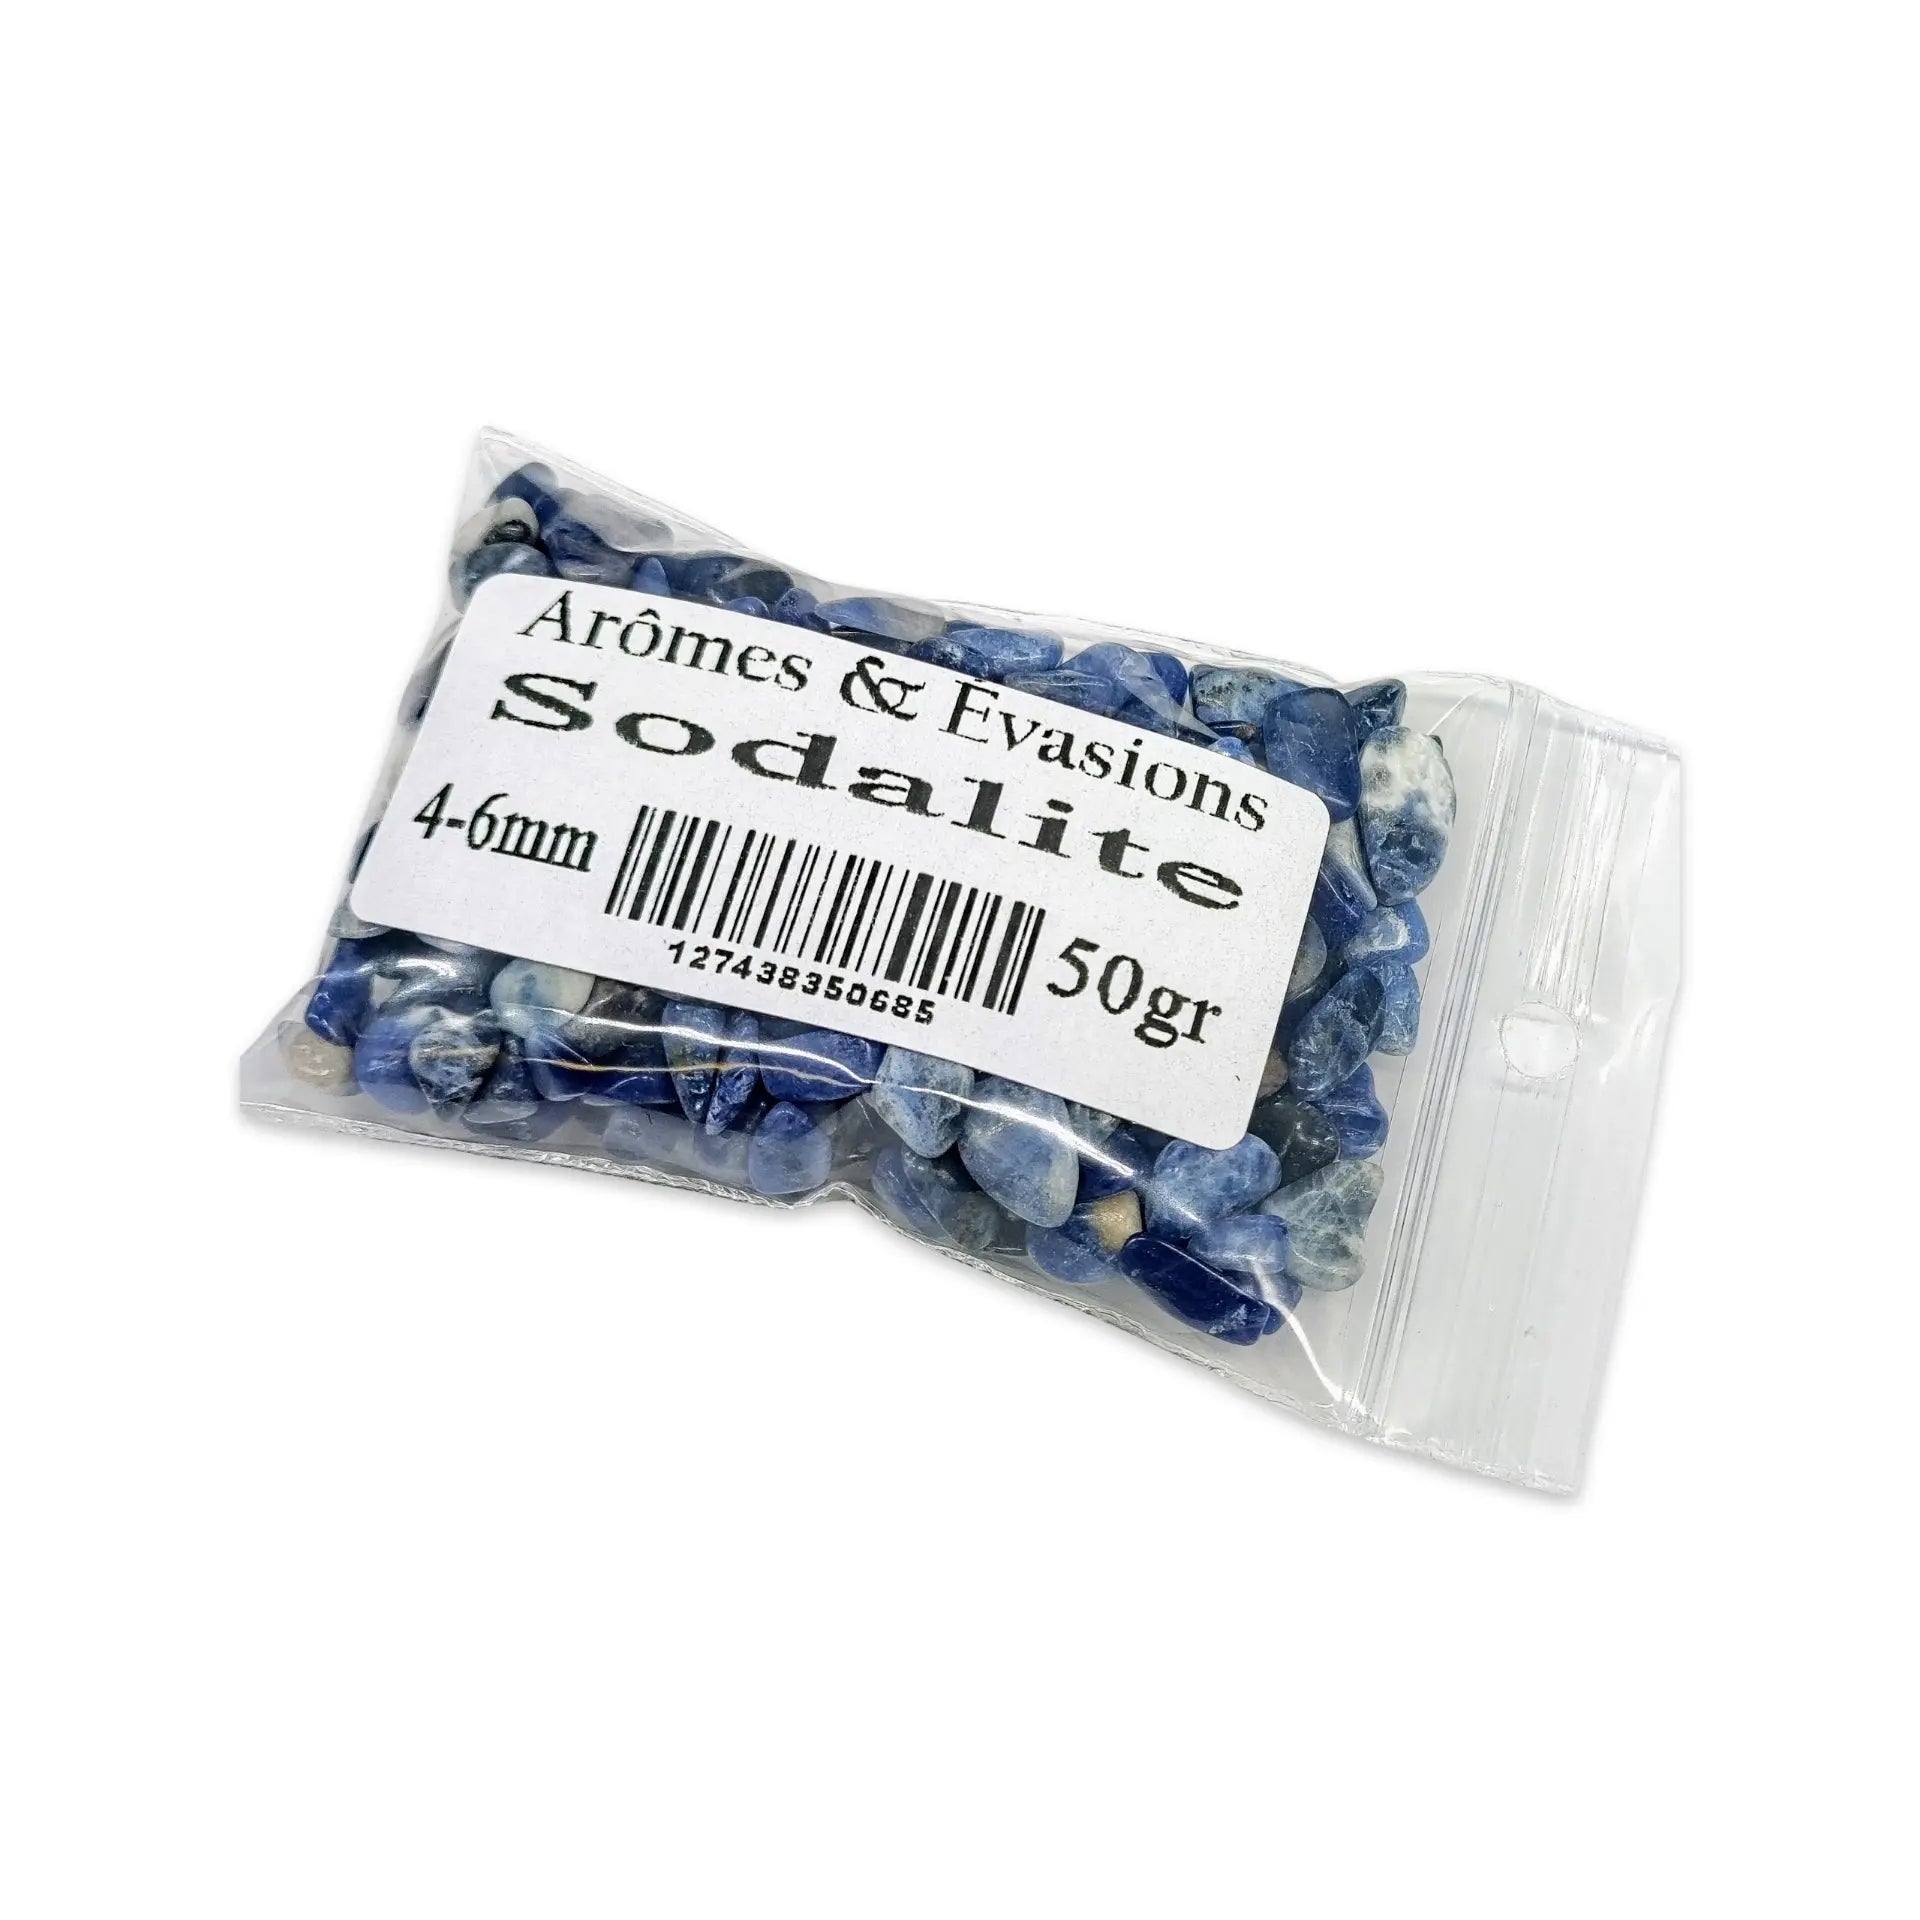 Stone -Tumbled Chips -Sodalite -4 to 6mm -Chips -Aromes Evasions 